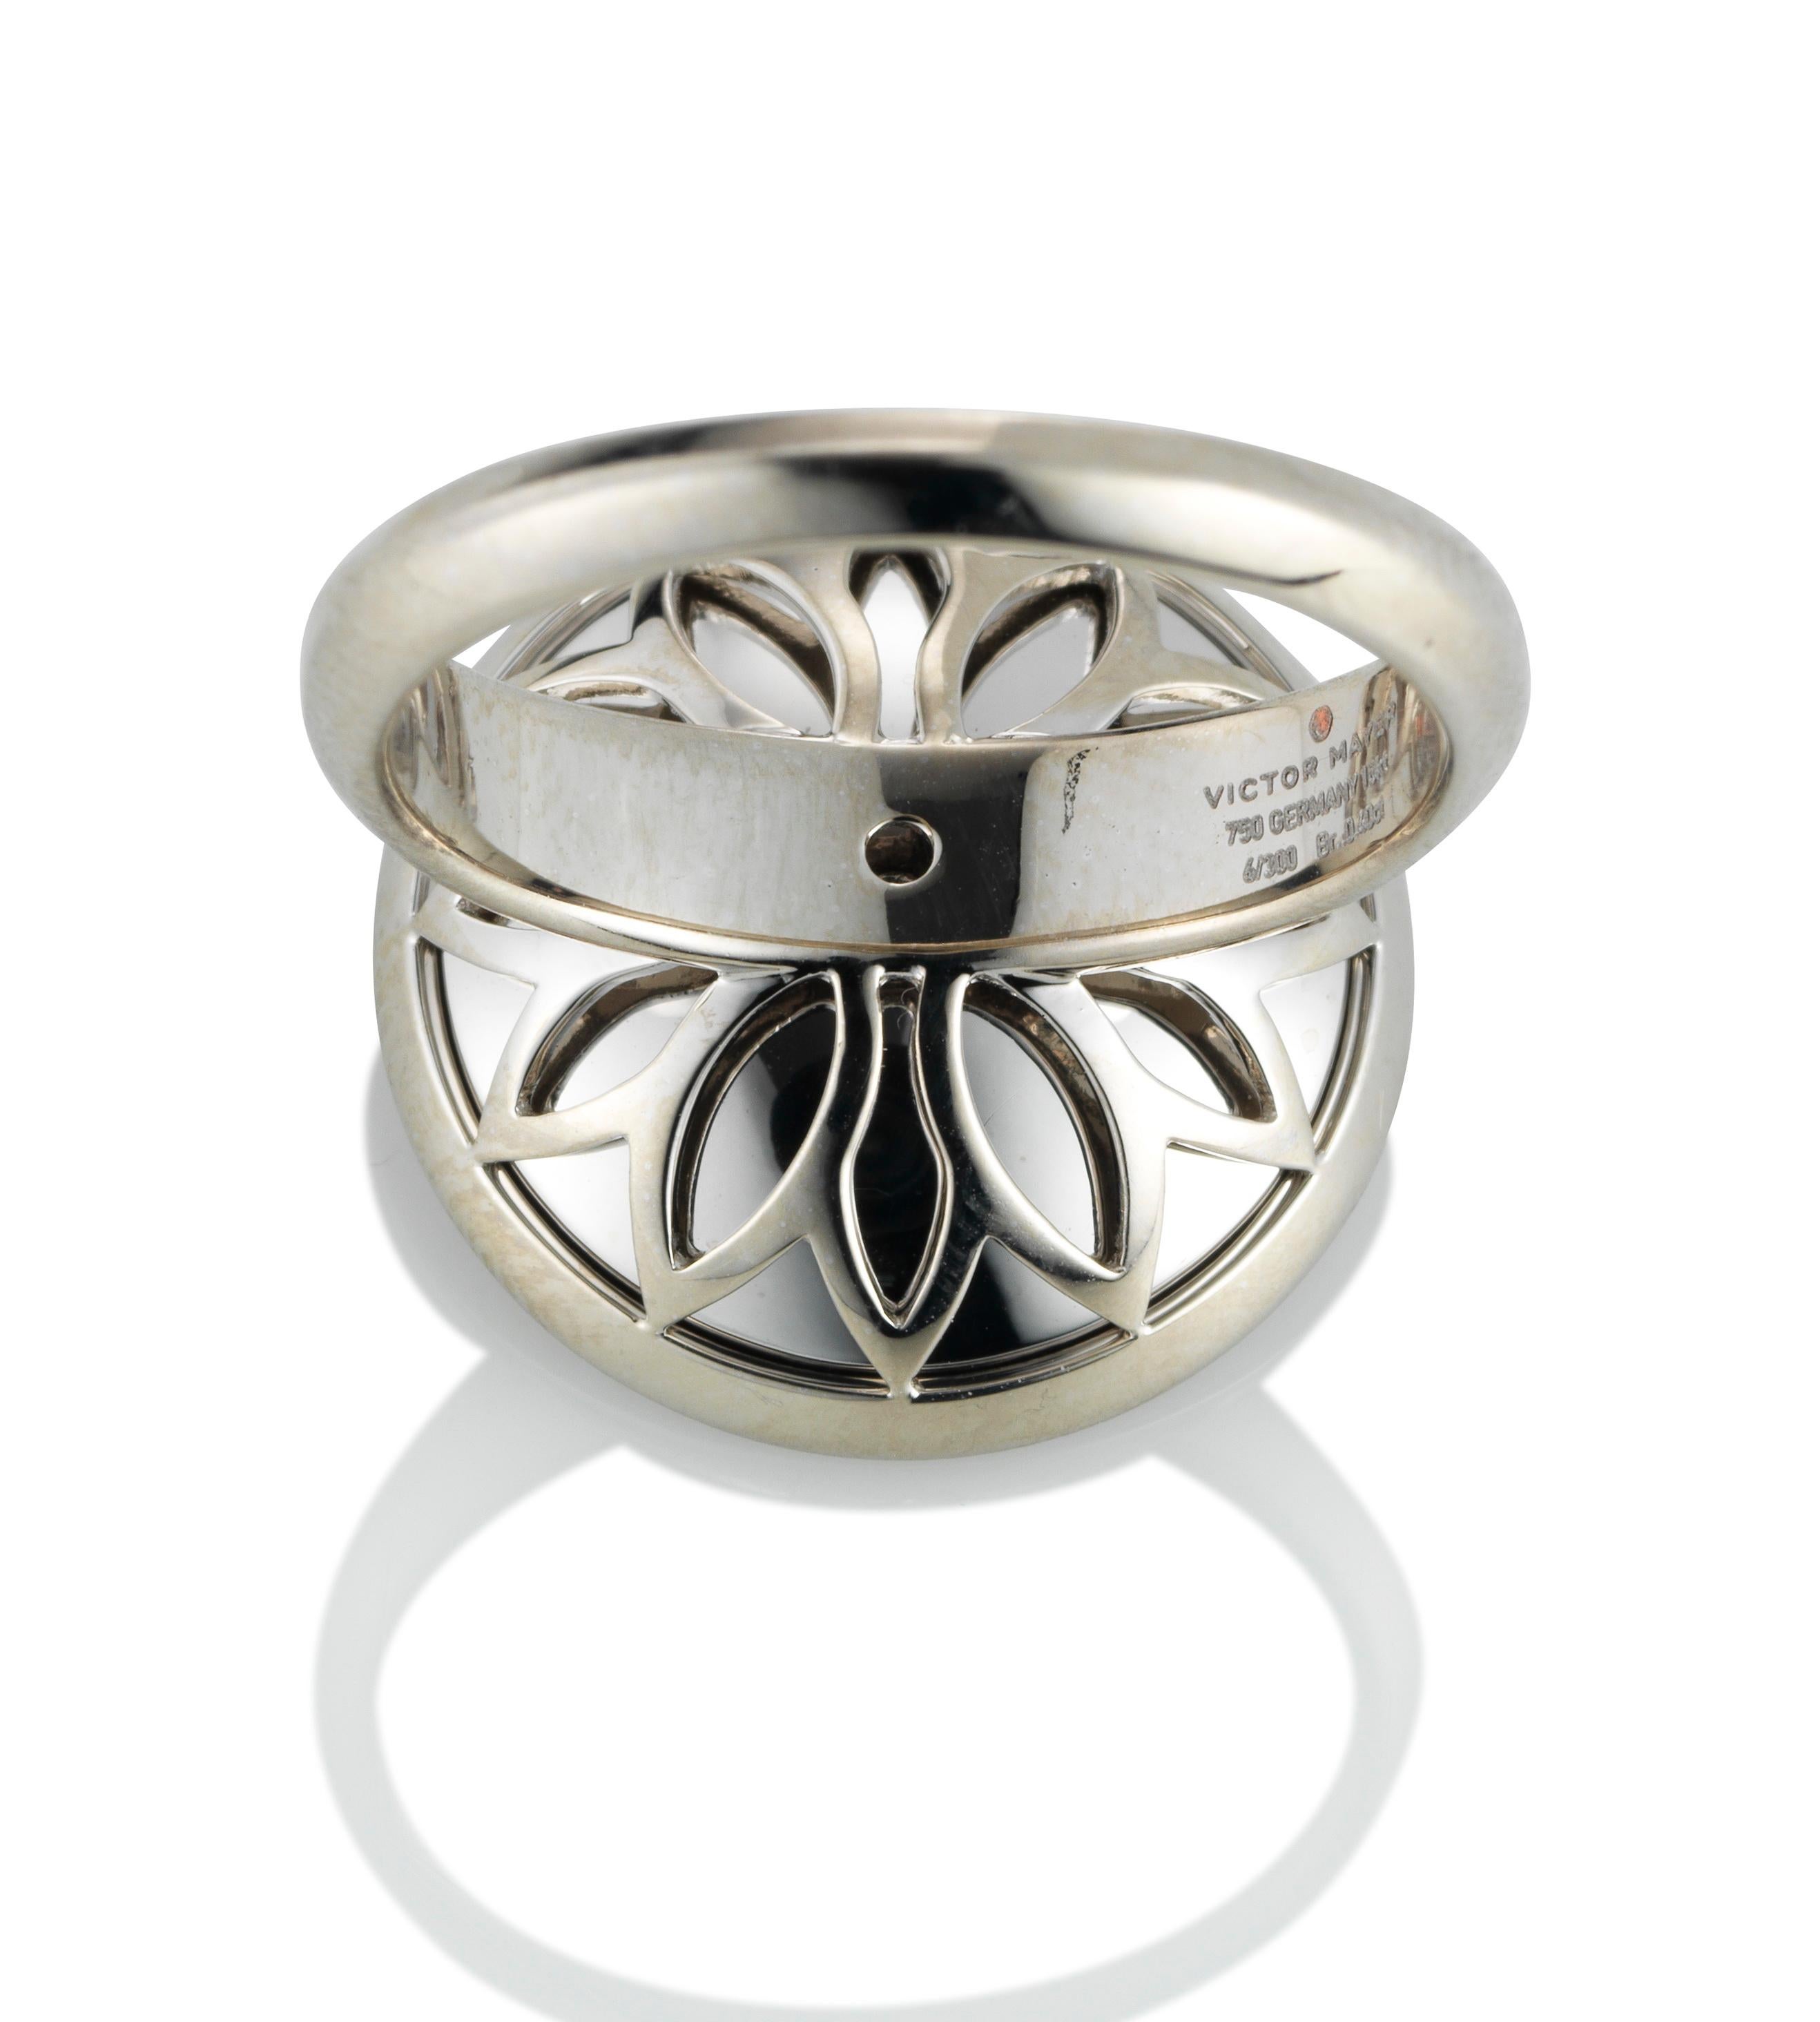 Victor Mayer Trance Ring 18k White Gold with Diamonds In New Condition For Sale In Pforzheim, DE